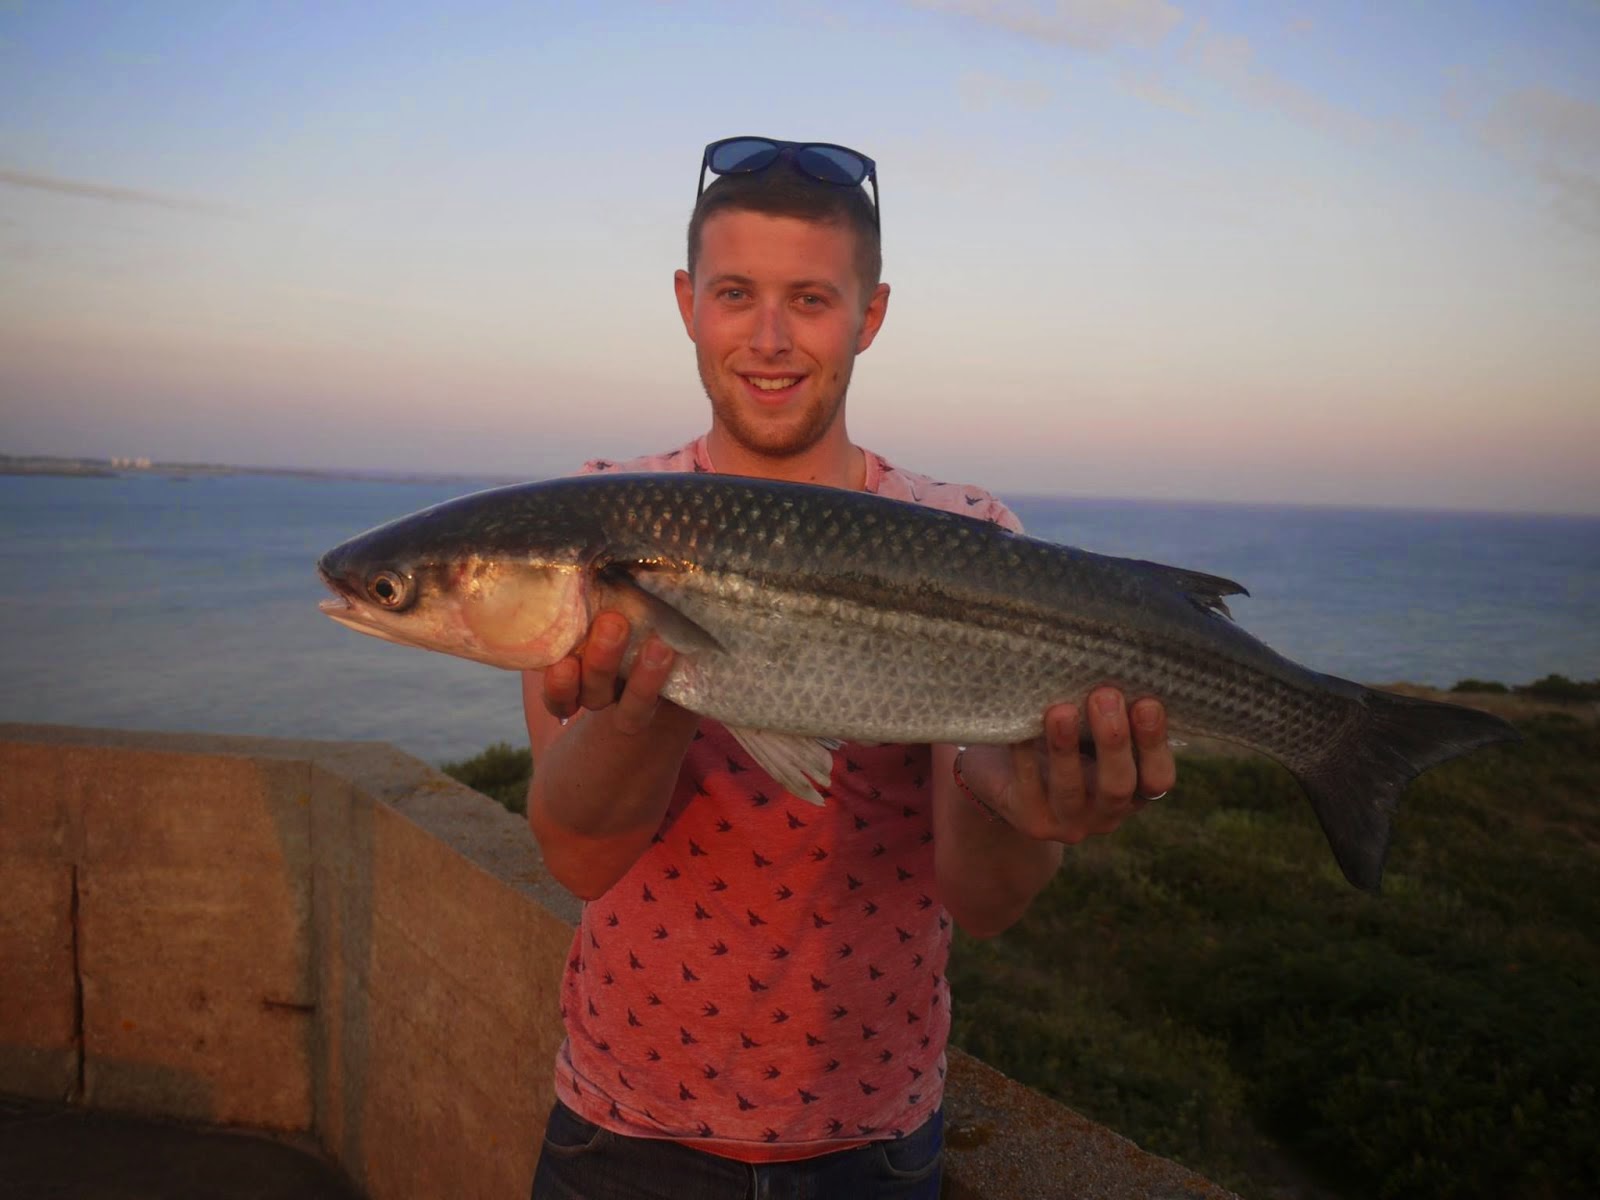 6lb 6oz Thin Lipped Mullet - Channel Island Record!